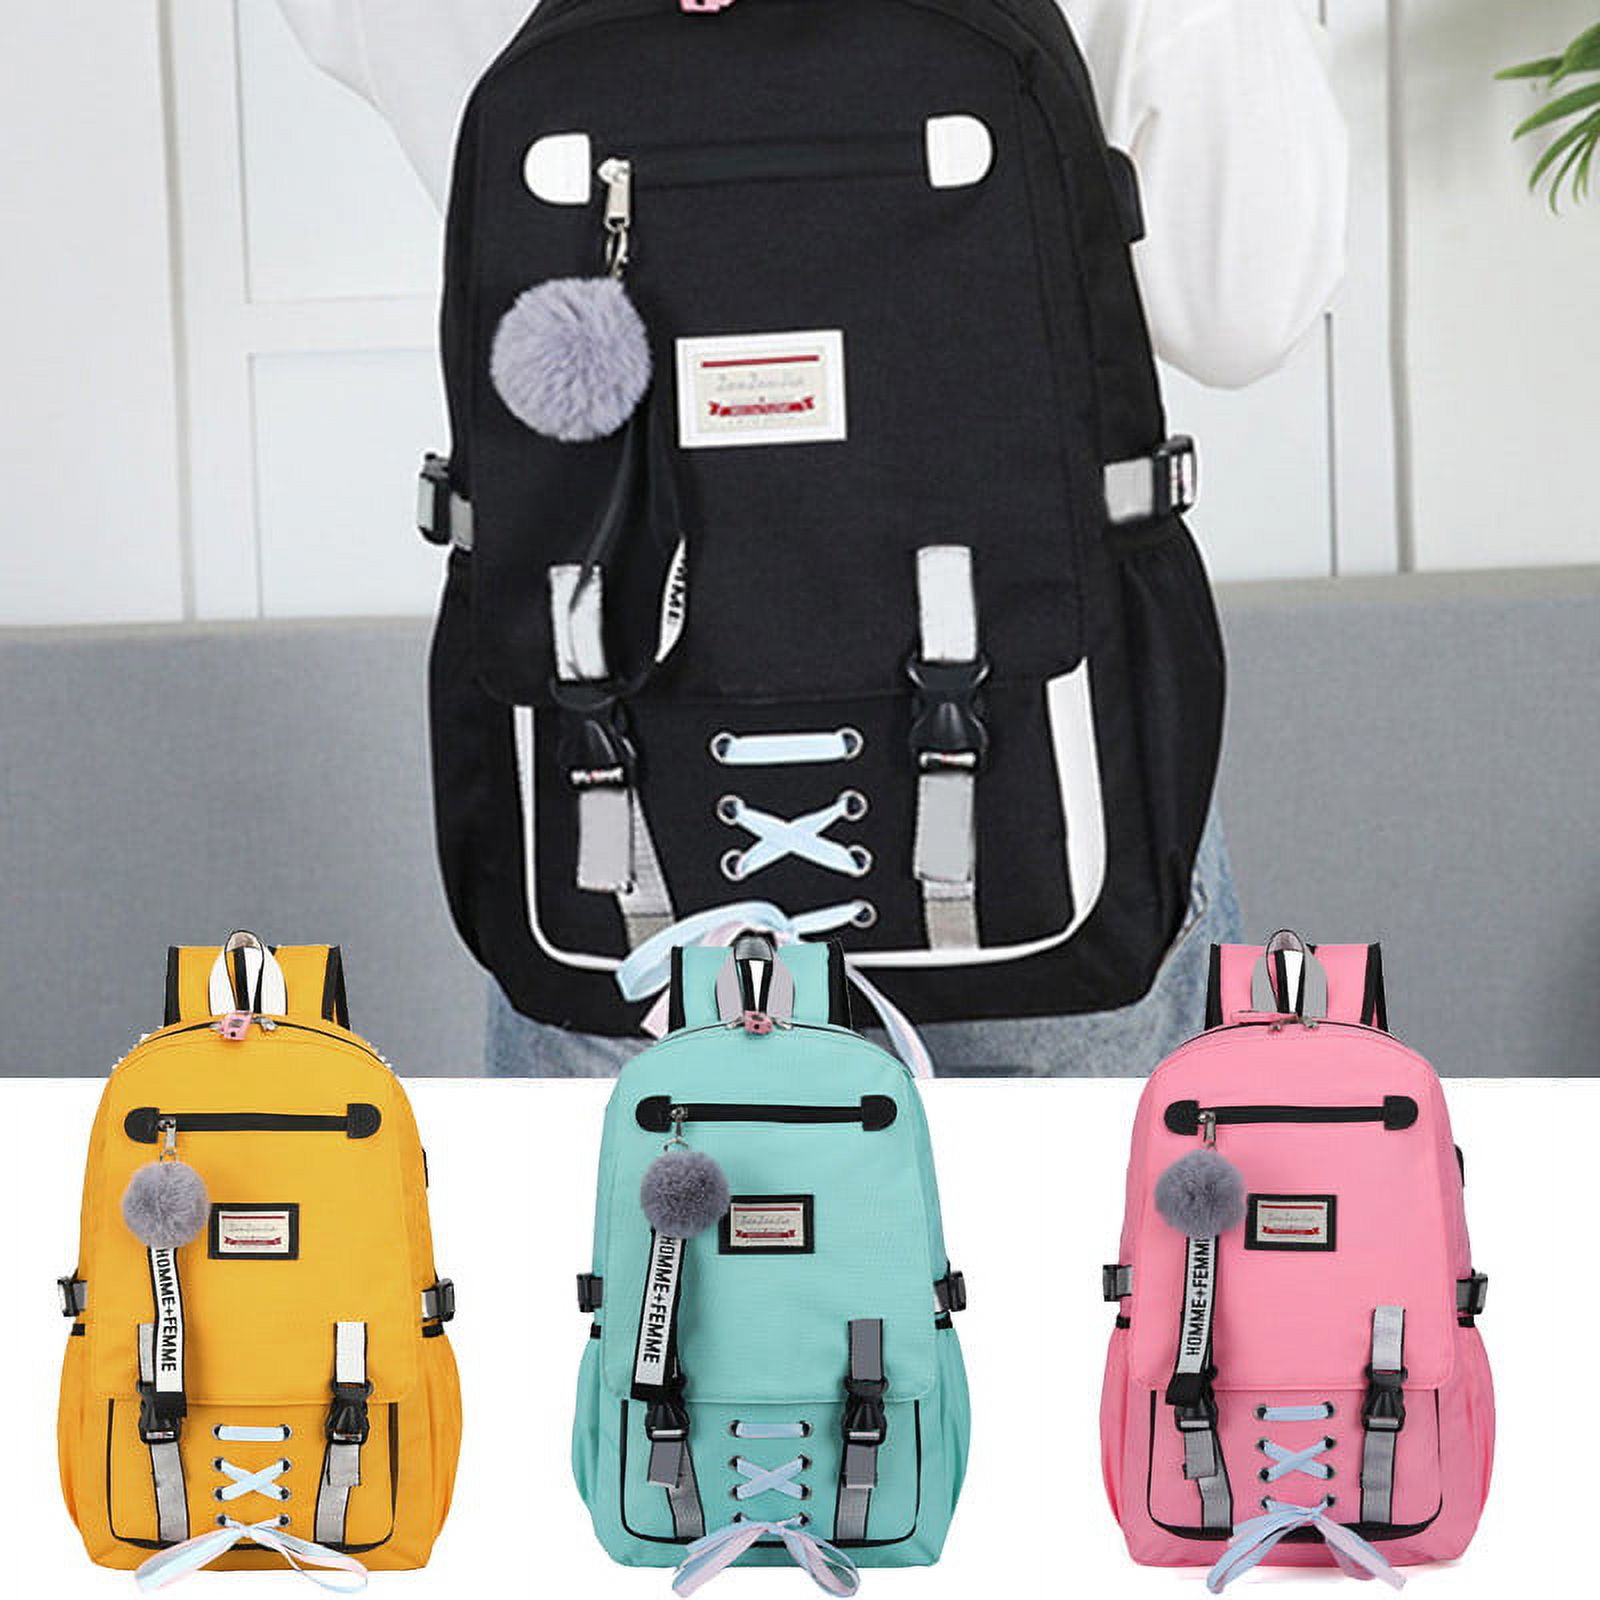 School Bags Large Bookbags for Teenage Girls USB with Lock Anti Theft Backpack Women Book Bag Youth Leisure College - image 2 of 6